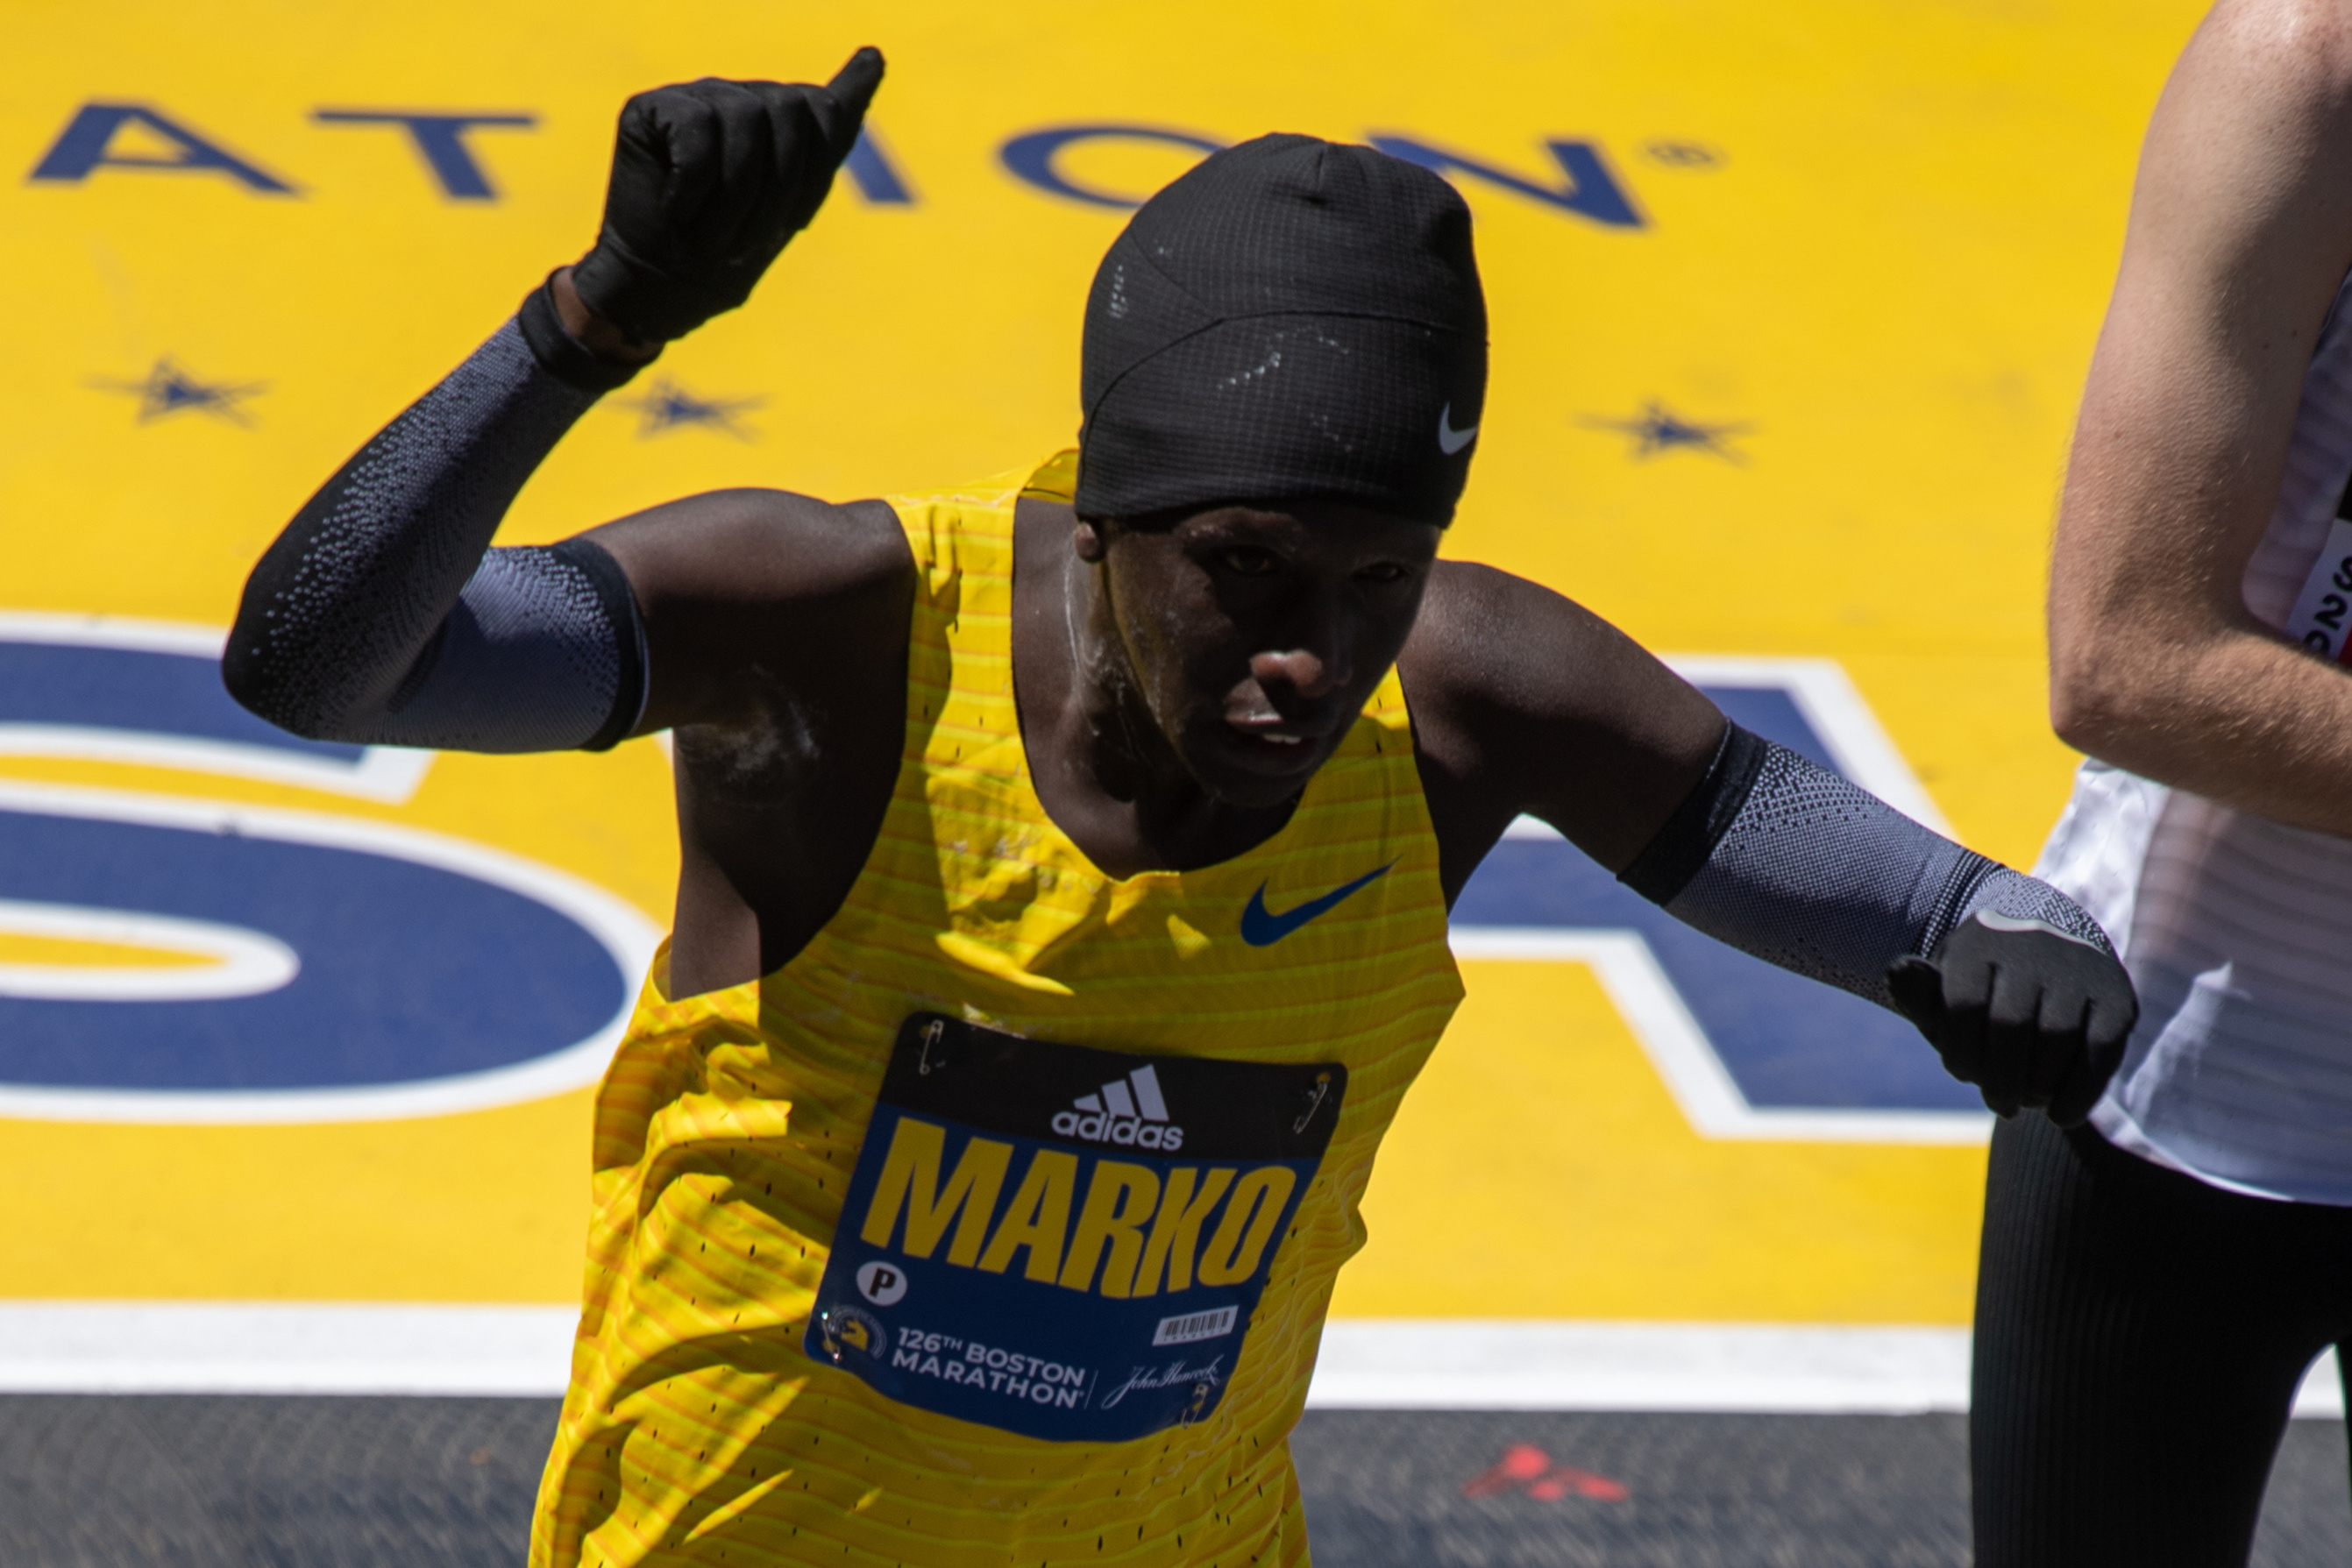 Marko Cheseto Lemtukei, of the United States, a double amputee, crosses the finish line in first place in the men’s Lower Limb Impairment division of the Boston Marathon on April 18, 2022 on Boylston Street in Boston, MA. Cheseto Lemtukei finished with a time of 2:37:01.